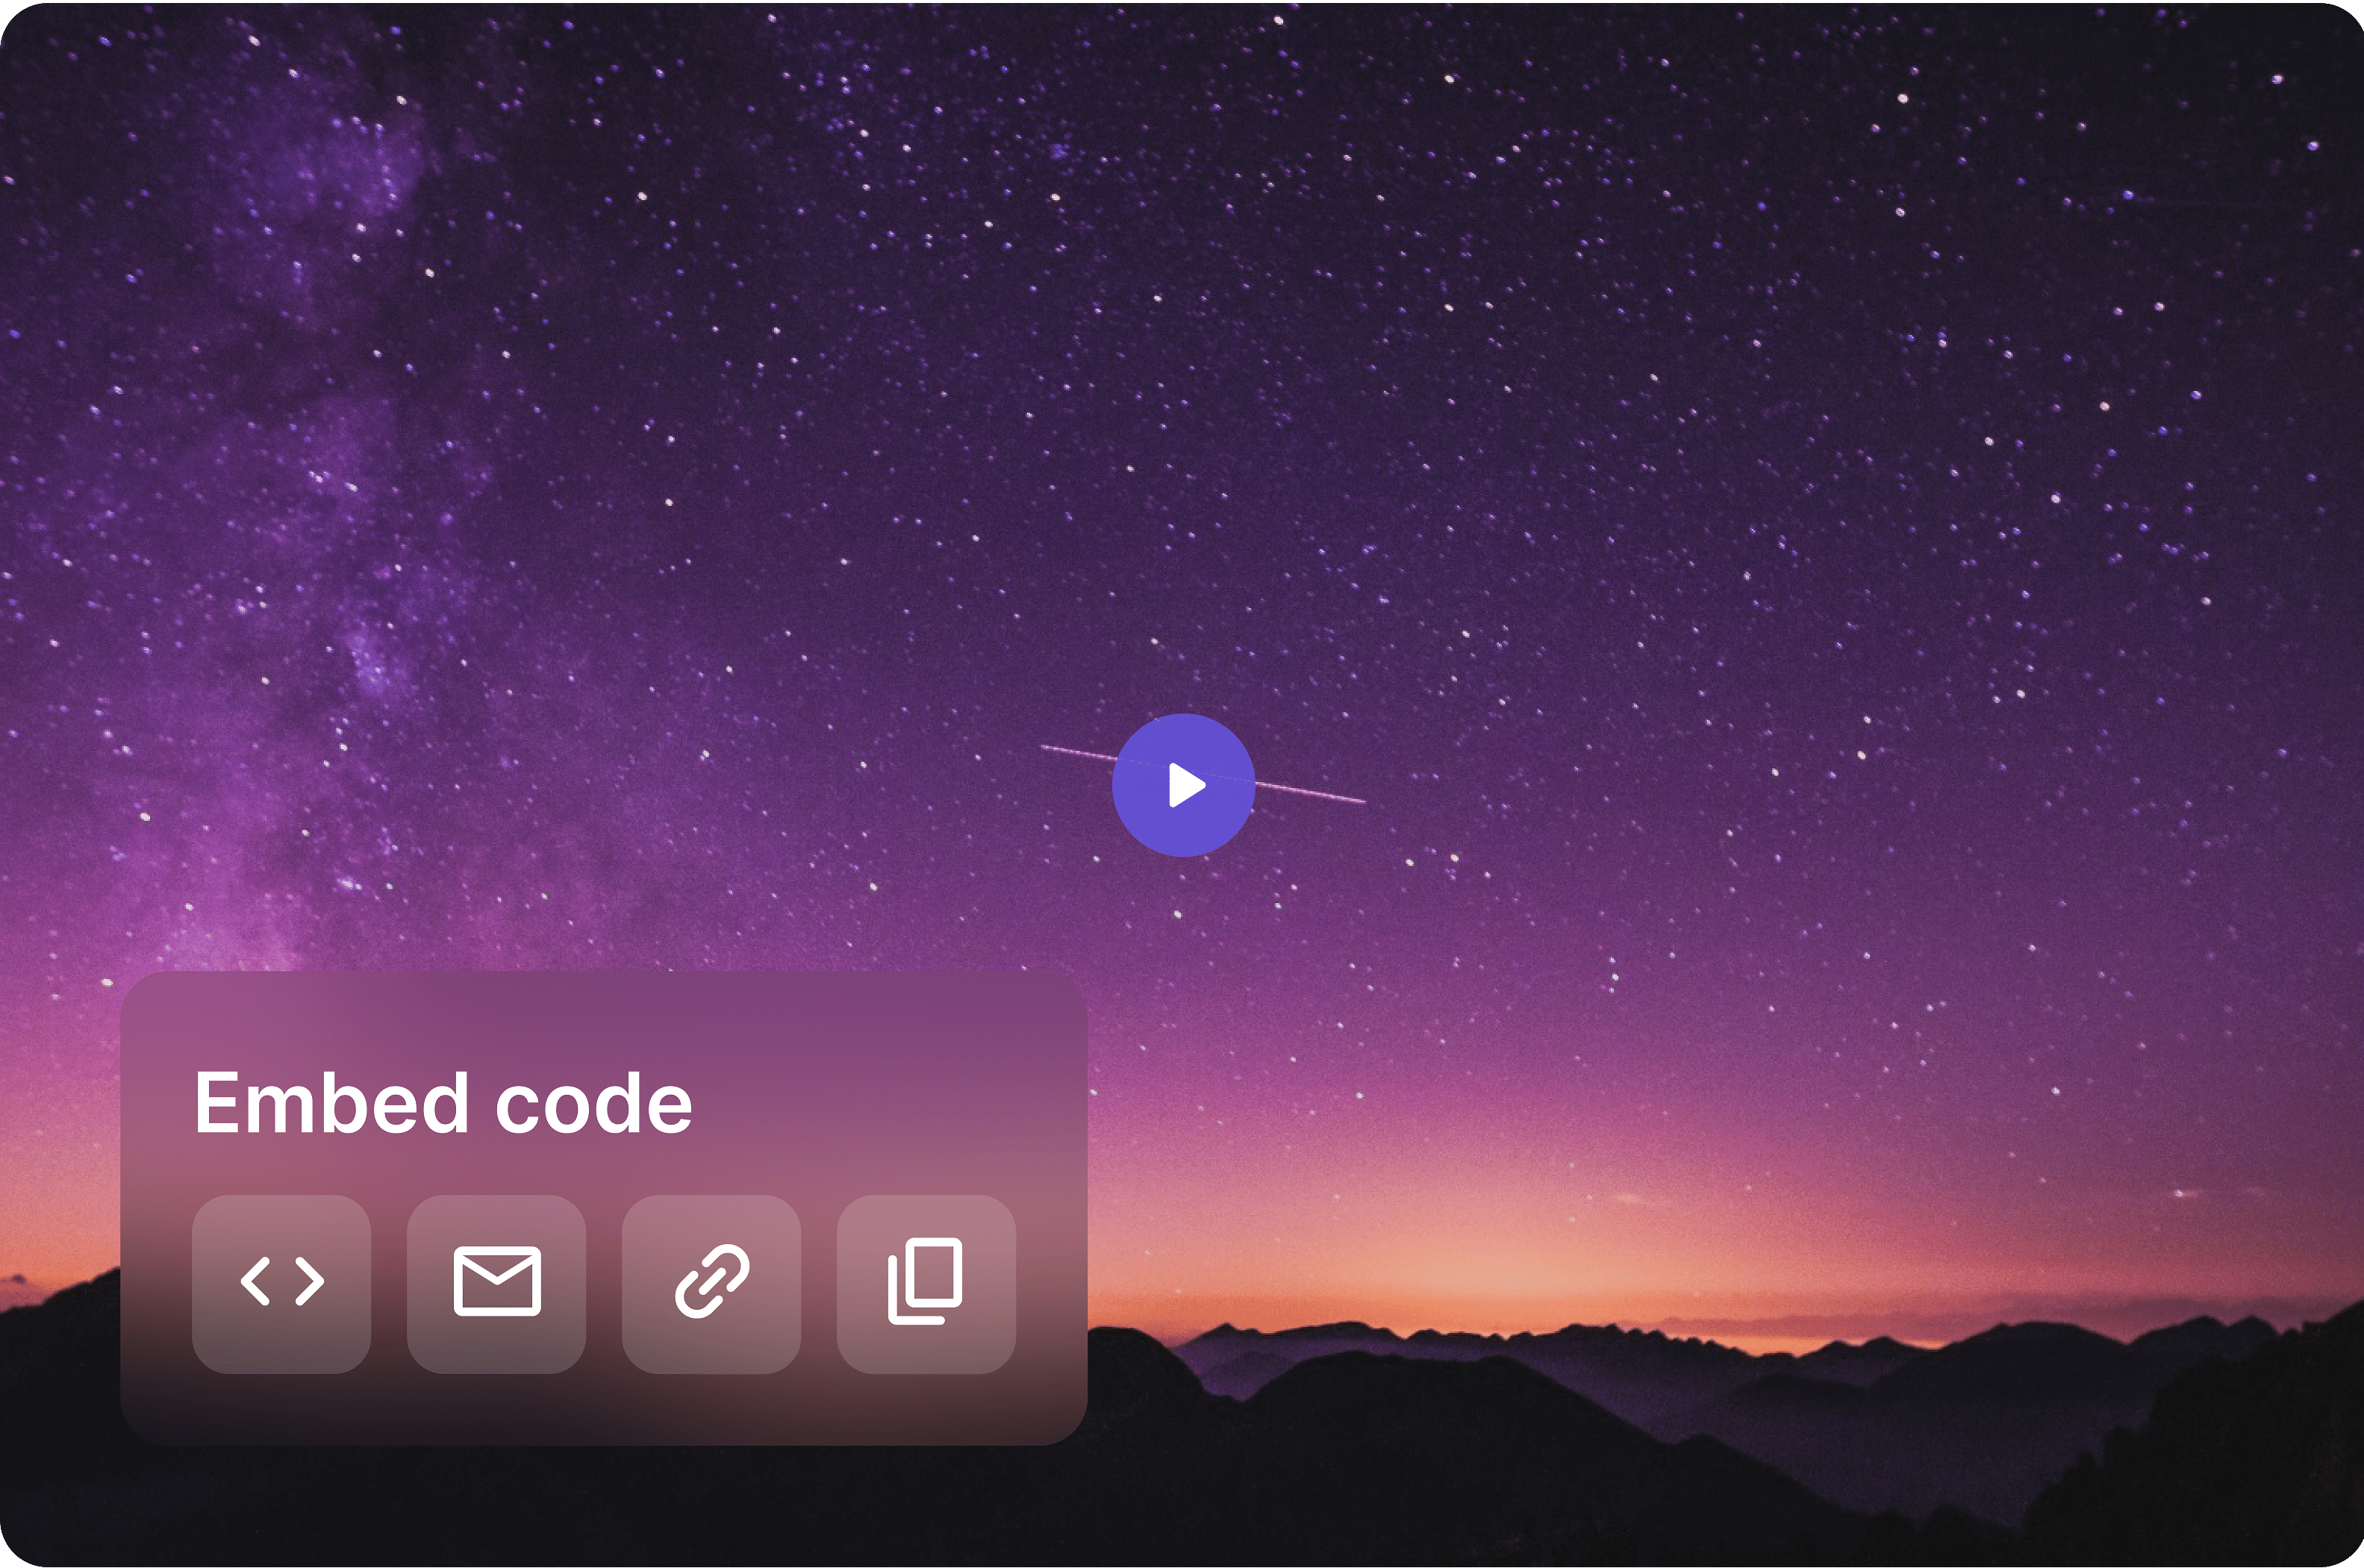 get share URLs and embedd codes instantly